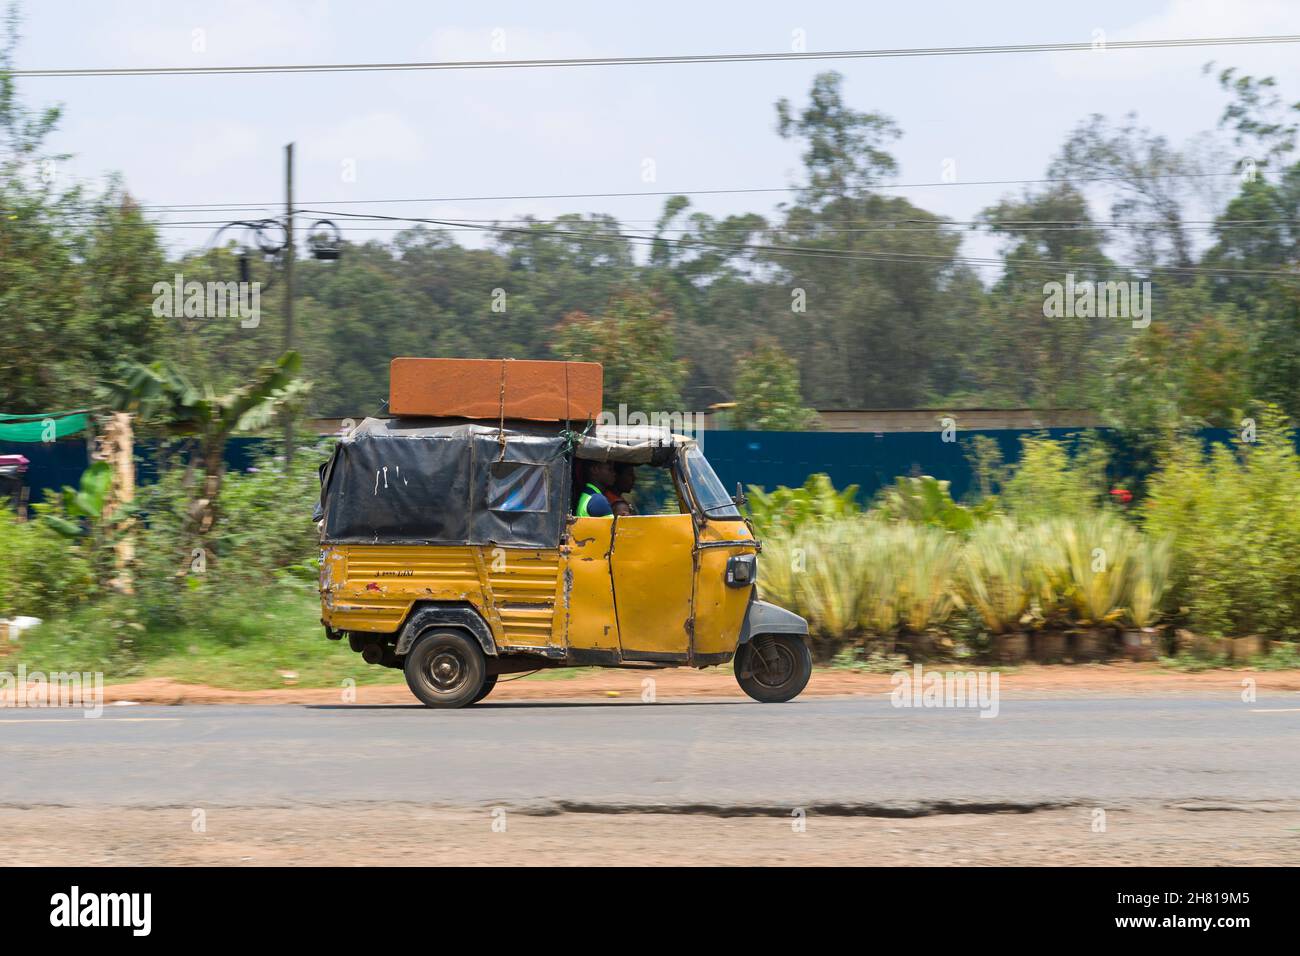 An auto rickshaw taxi which are know locally as a Tuk Tuk, they are used for passengers and goods. Ngong Road, Karen, Nairobi, Kenya.  10 Oct 2021 Stock Photo